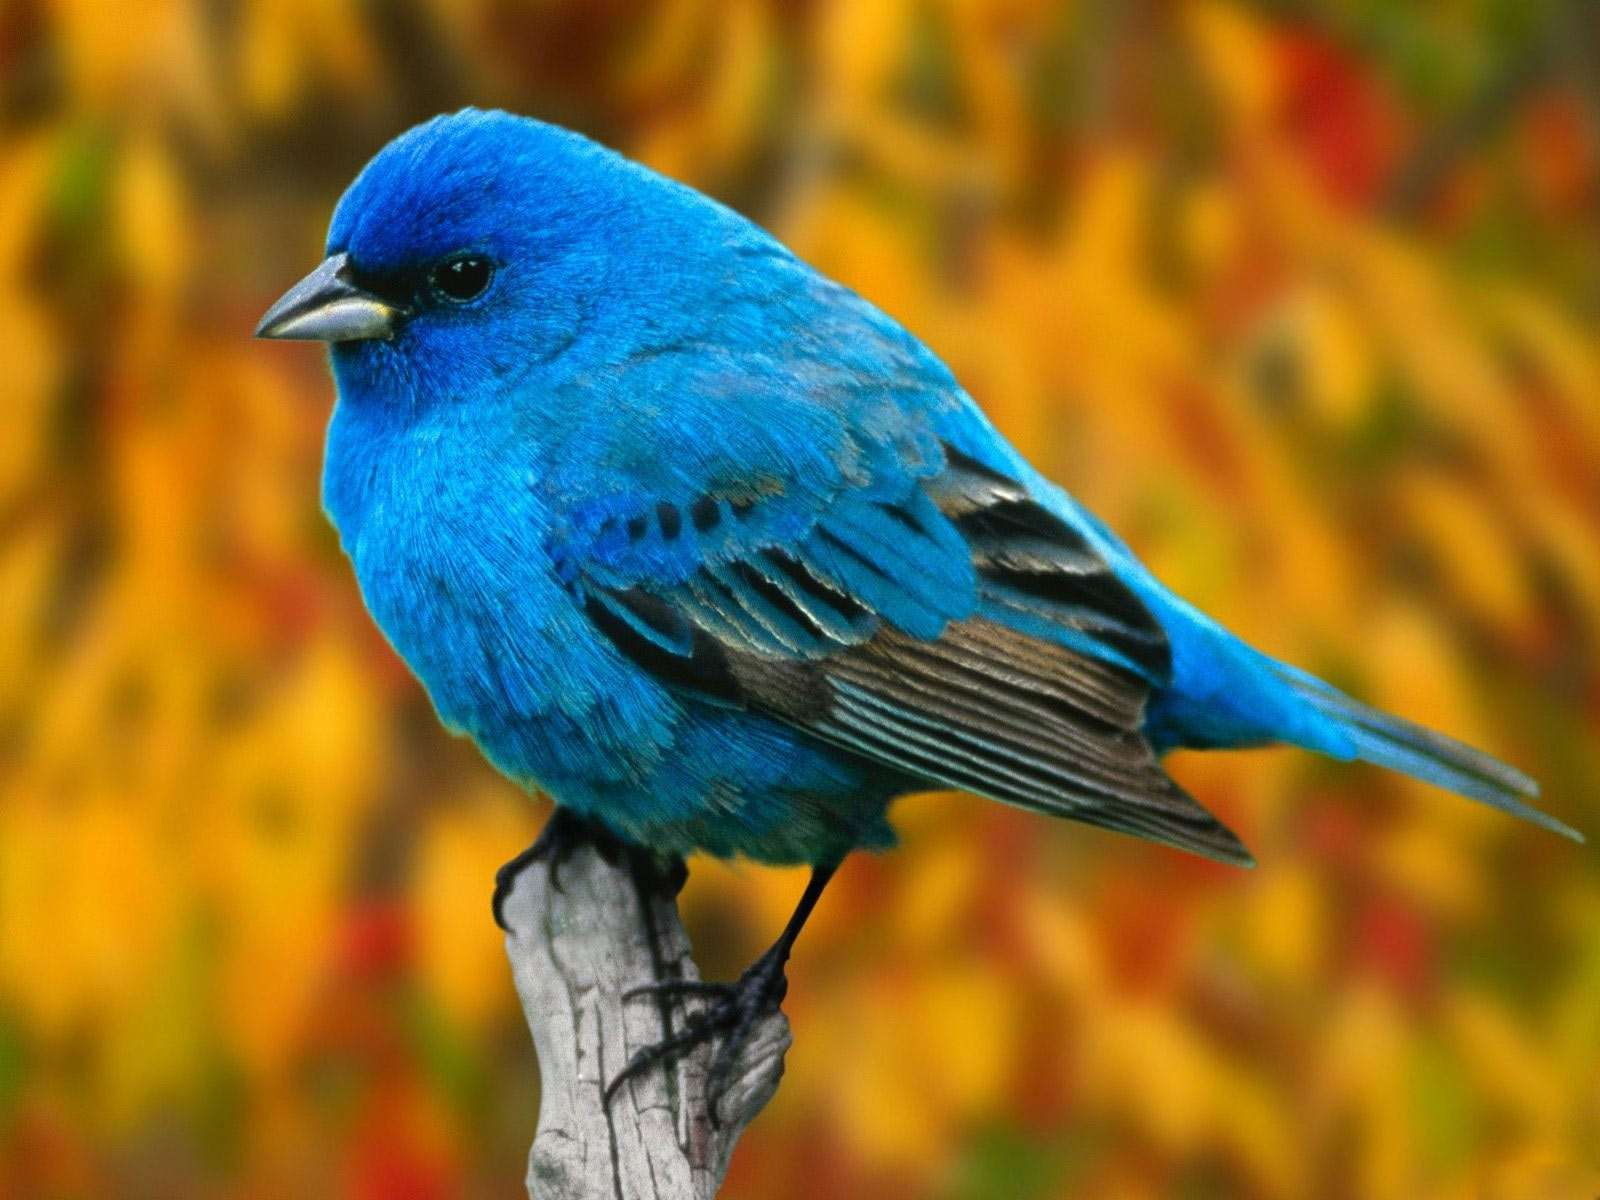 What are some symbol meanings of Bird